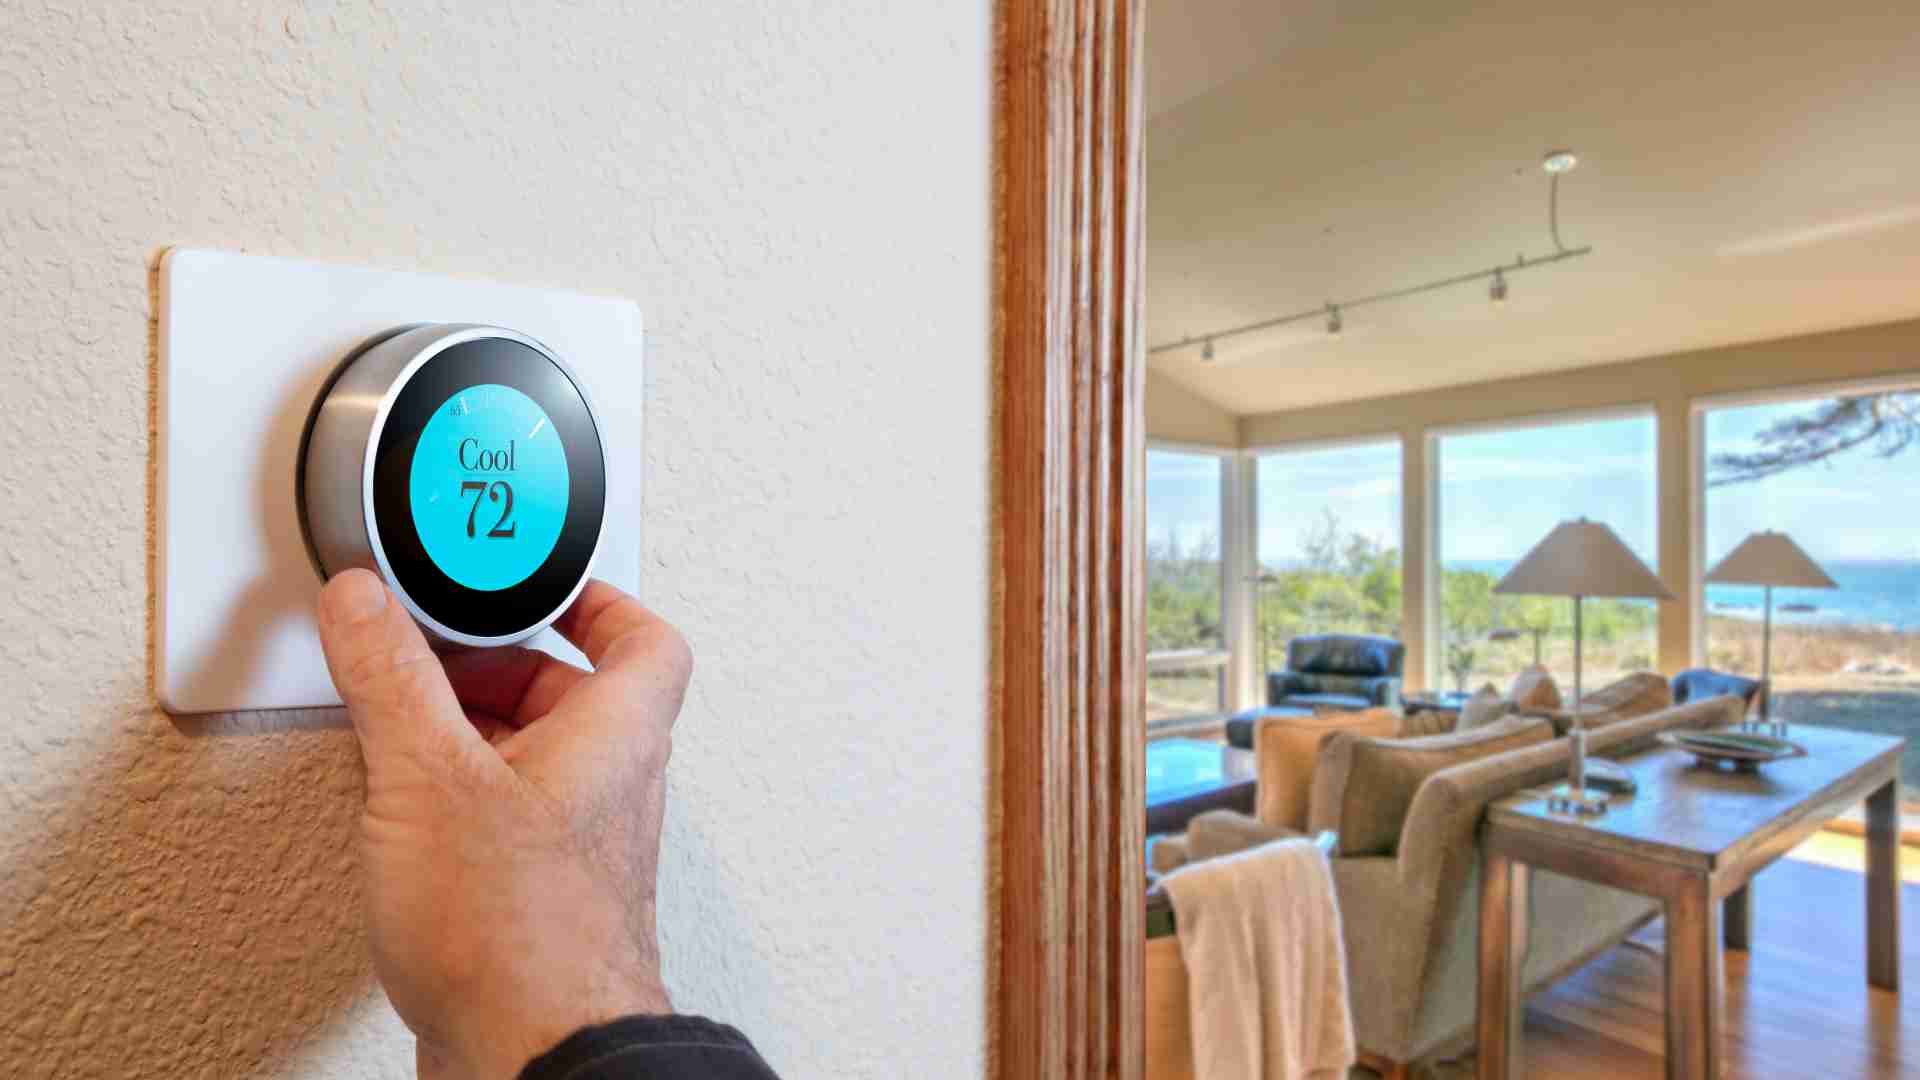 A person adjusts a smart thermostat set to 72°F in a home with a living room view of large windows overlooking a natural landscape.